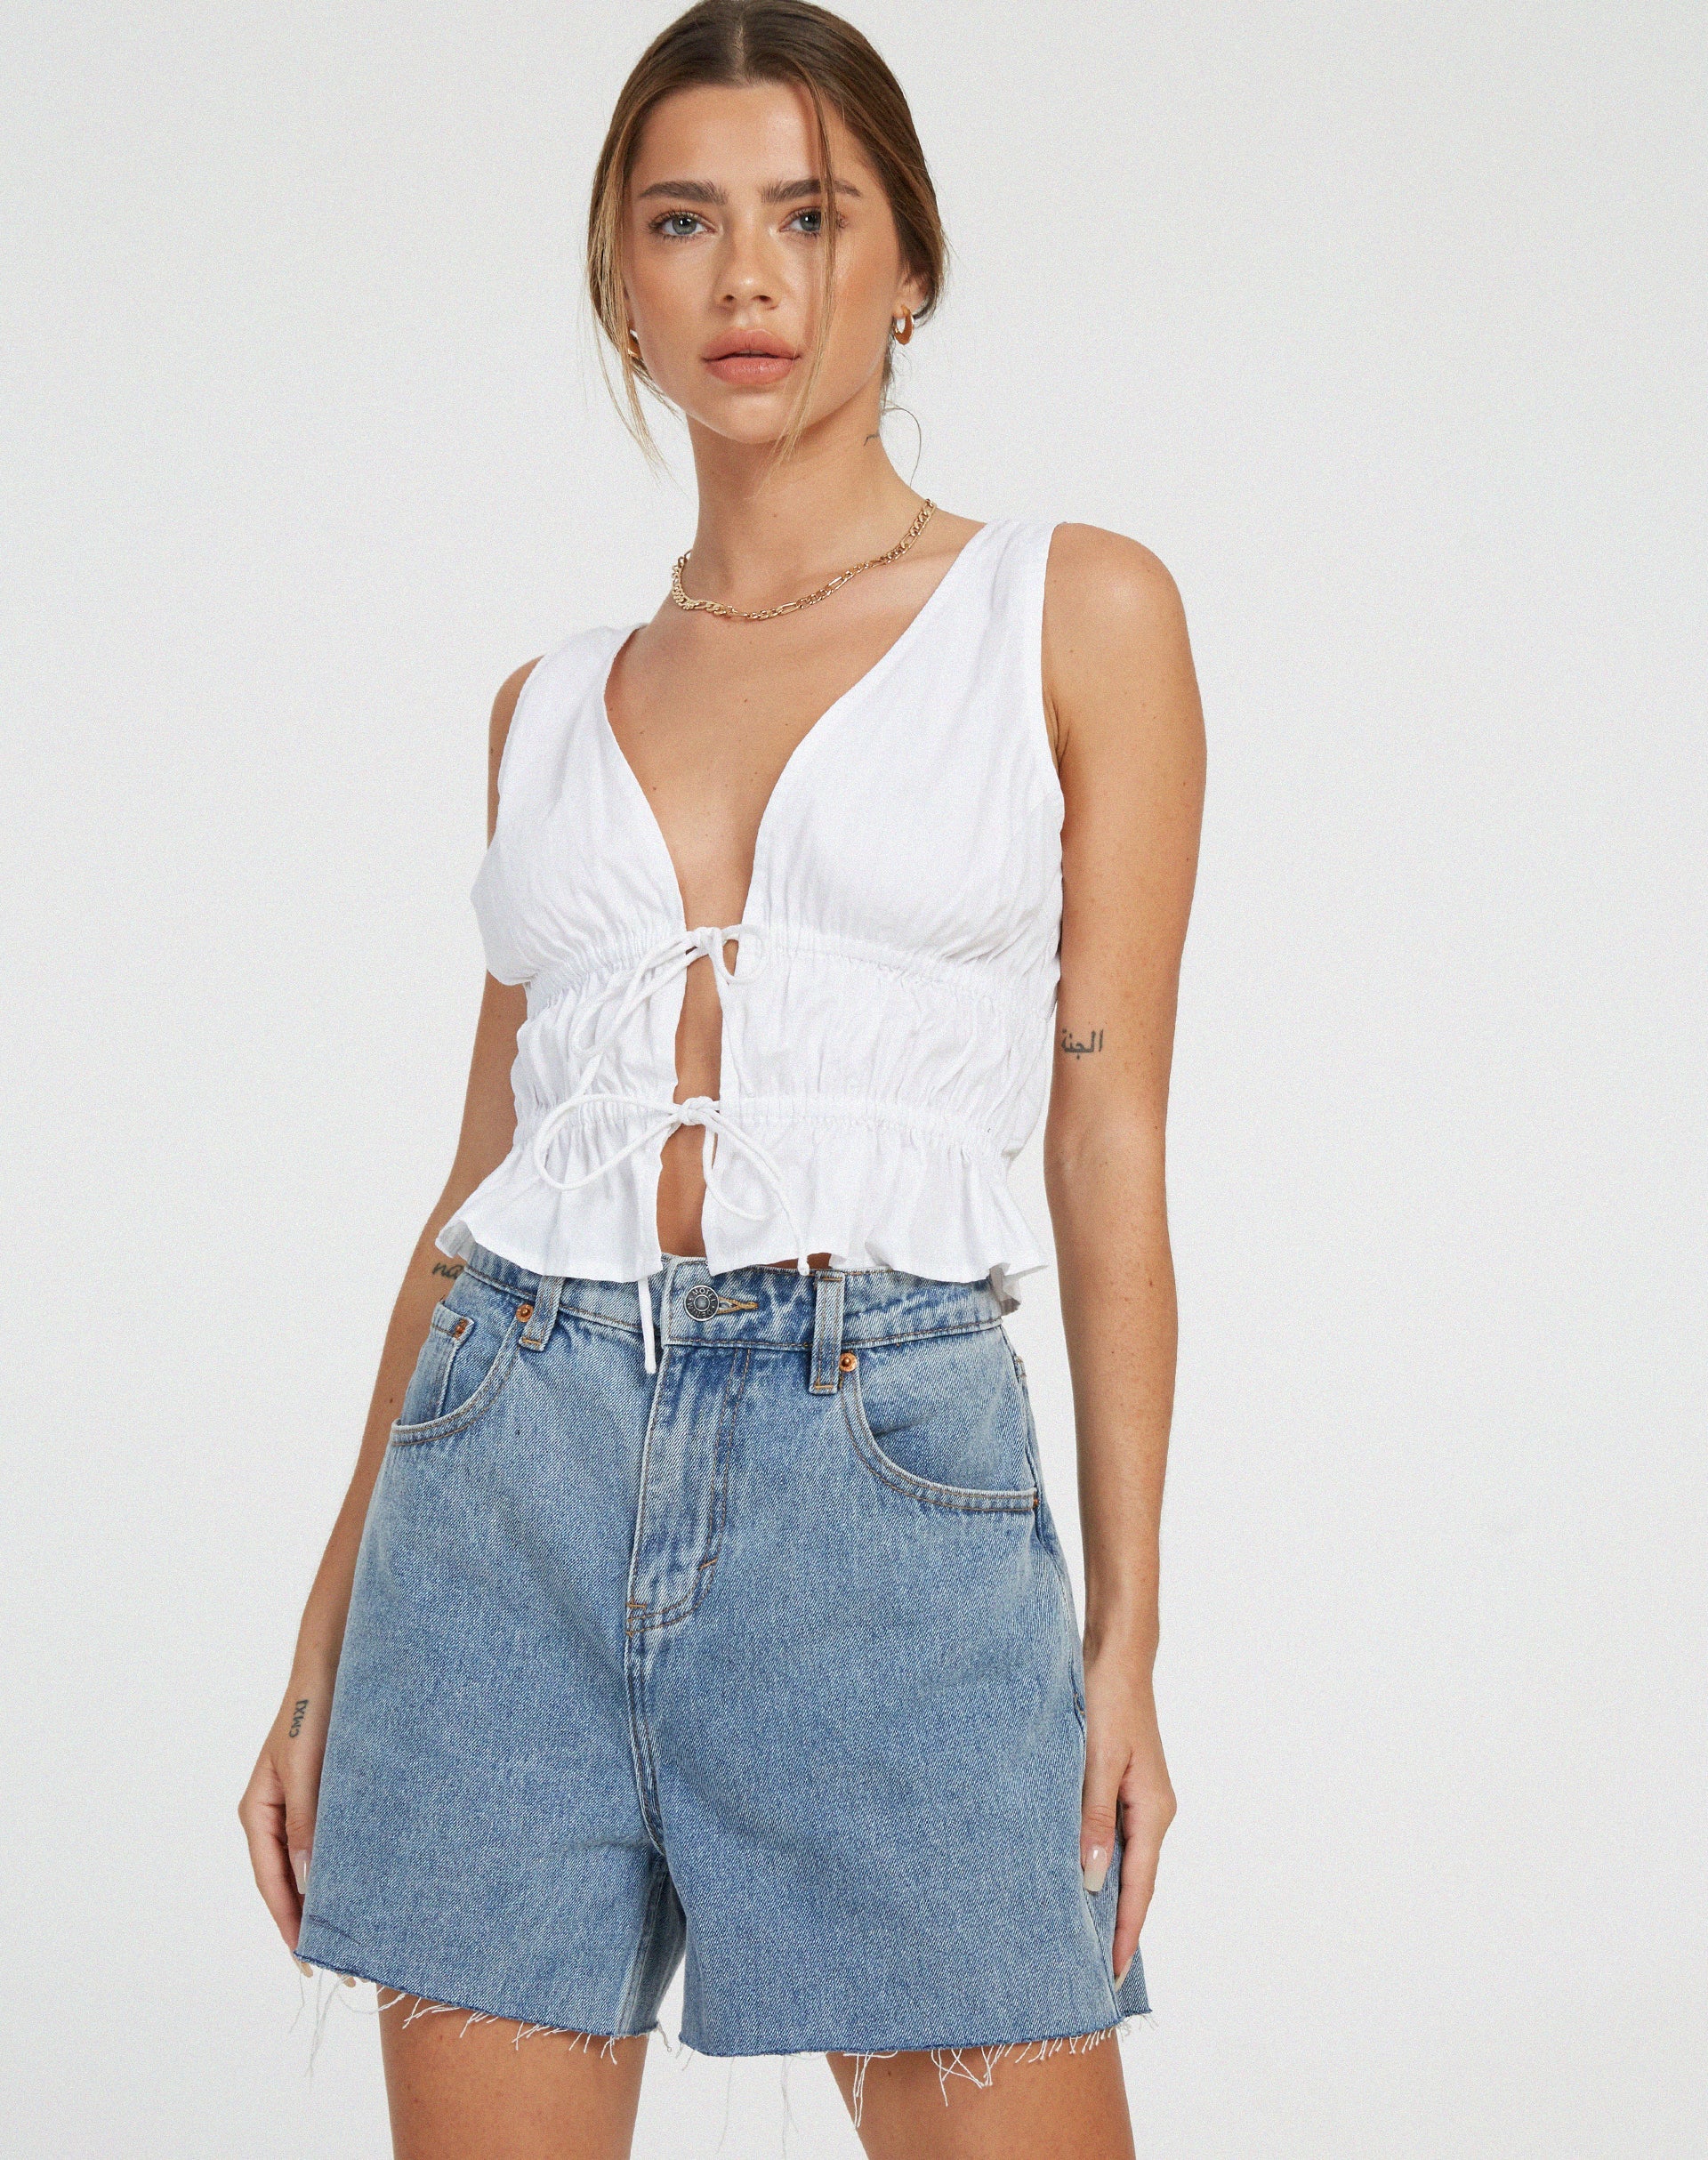 image of Kayson Crop Top in White